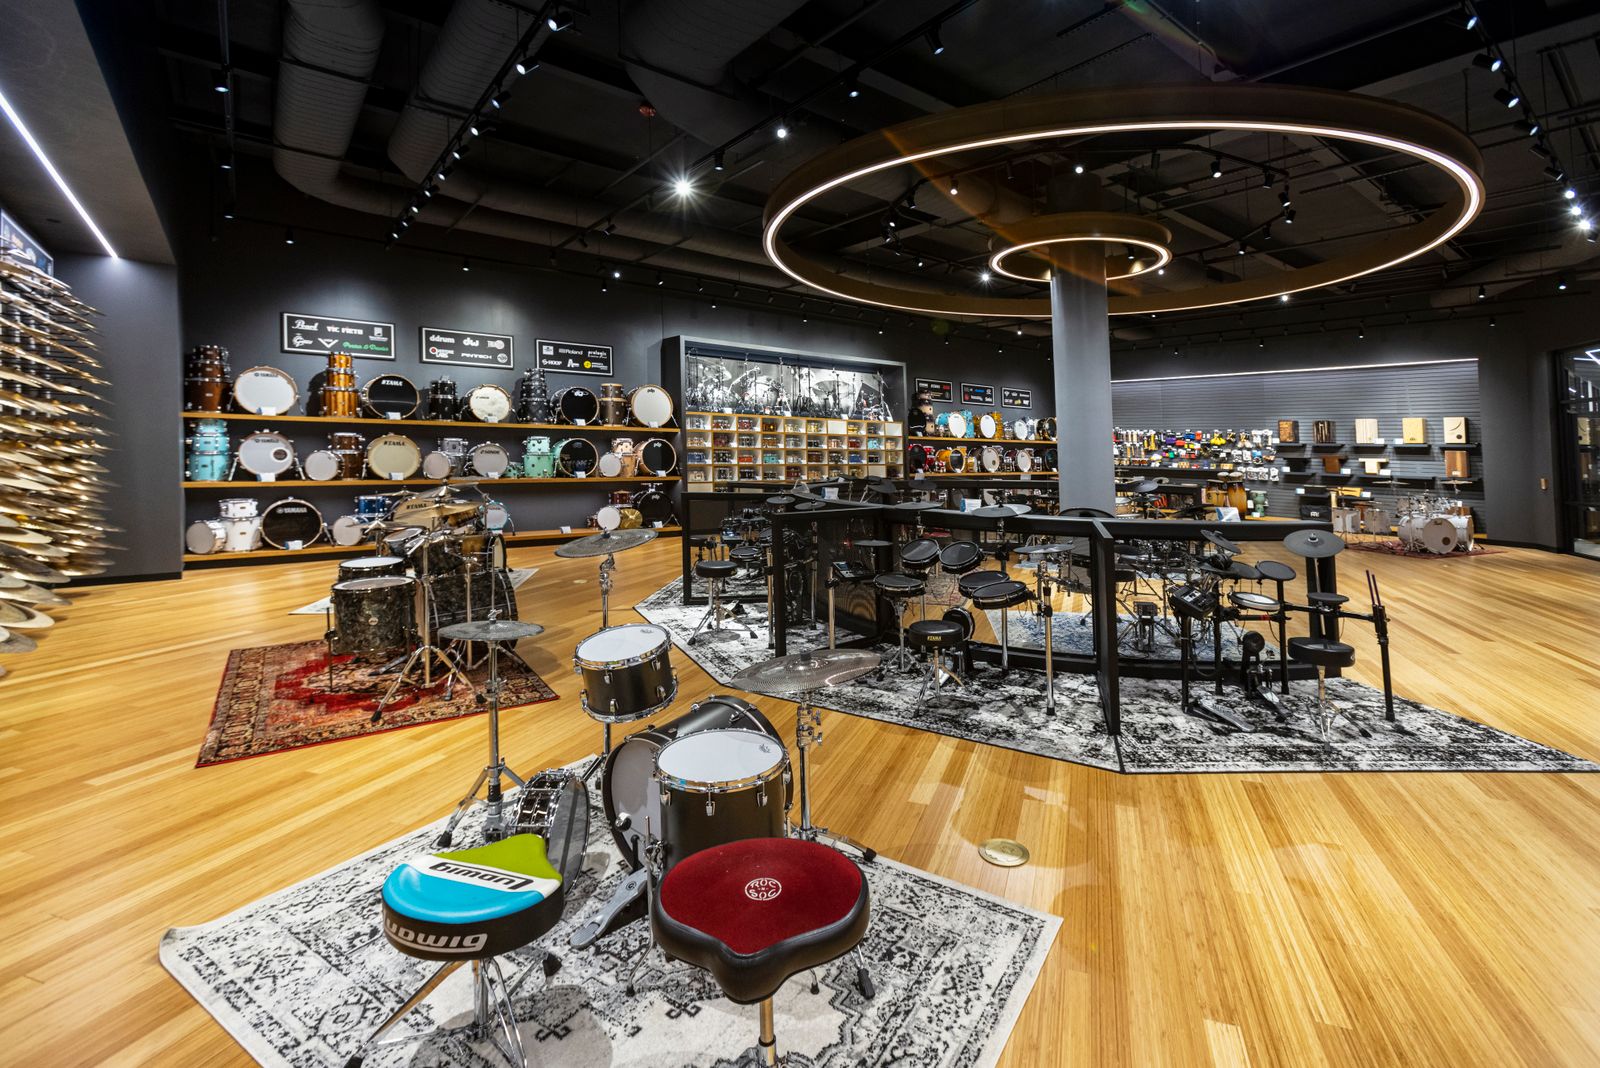 Drum kits and cymbals are displayed in a large open retail showroom